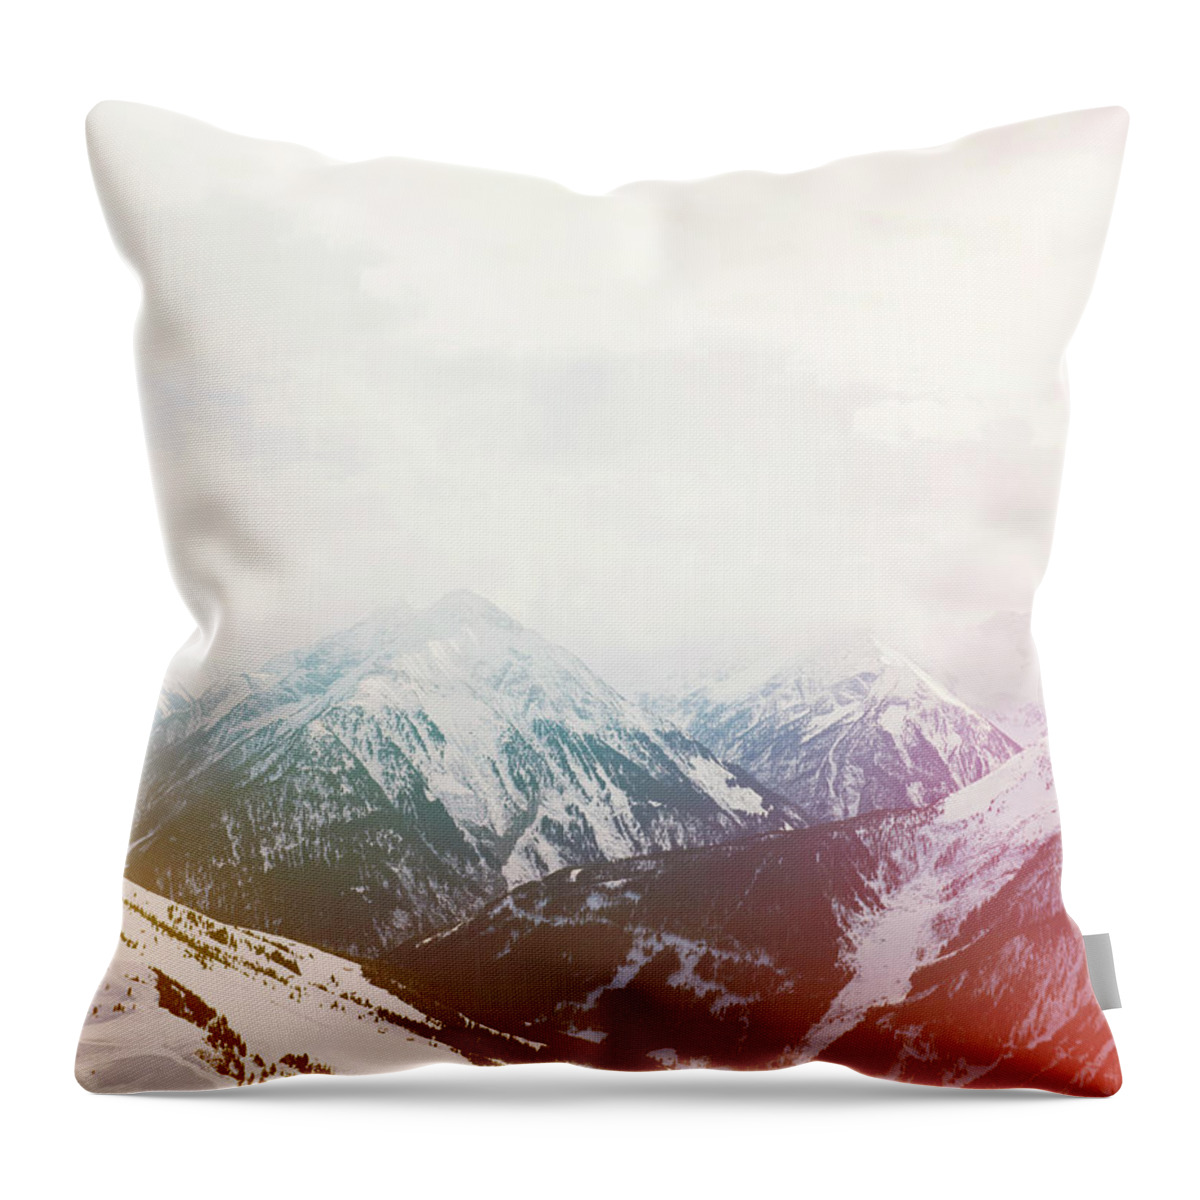 Scenics Throw Pillow featuring the photograph Hintertux Valley by Mark Leary